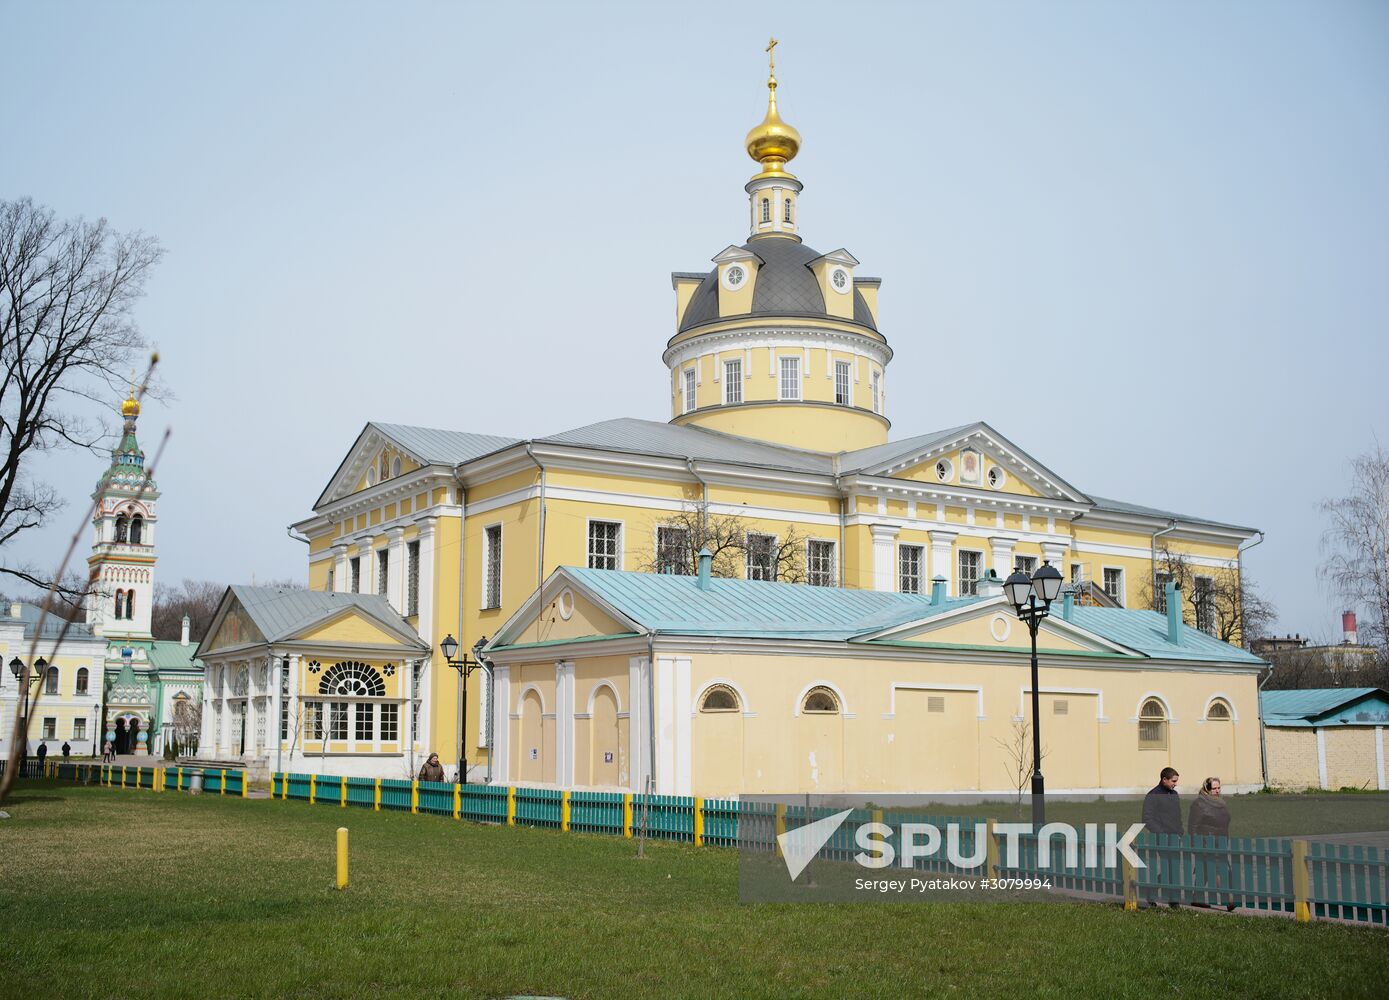 Church and administration compound of Russian Orthodox Old-Rite Church's Moscow Achdiocese